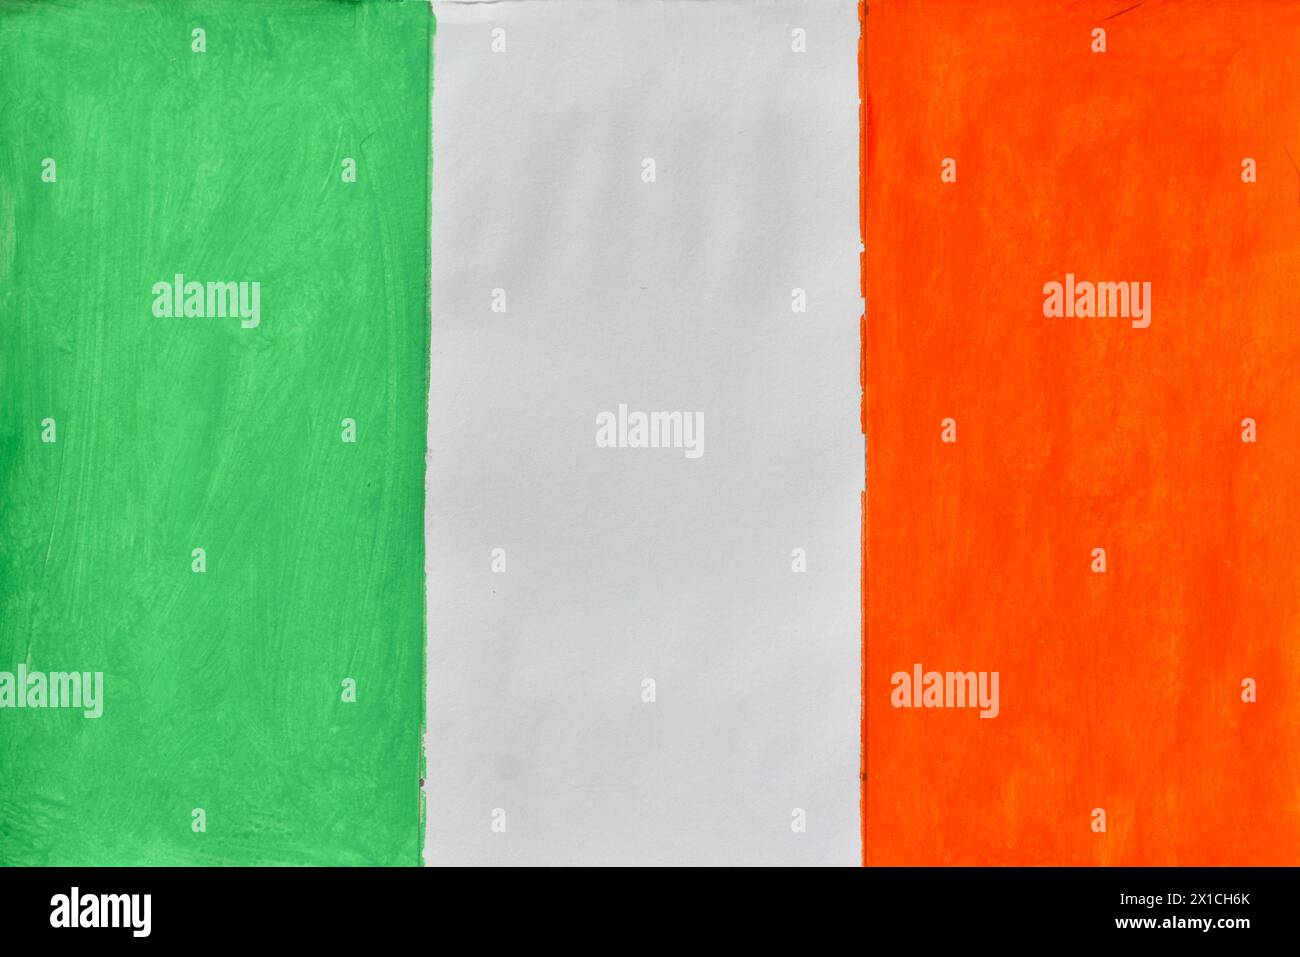 Flag of Ireland painted with watercolors on cardboard. Stock Photo